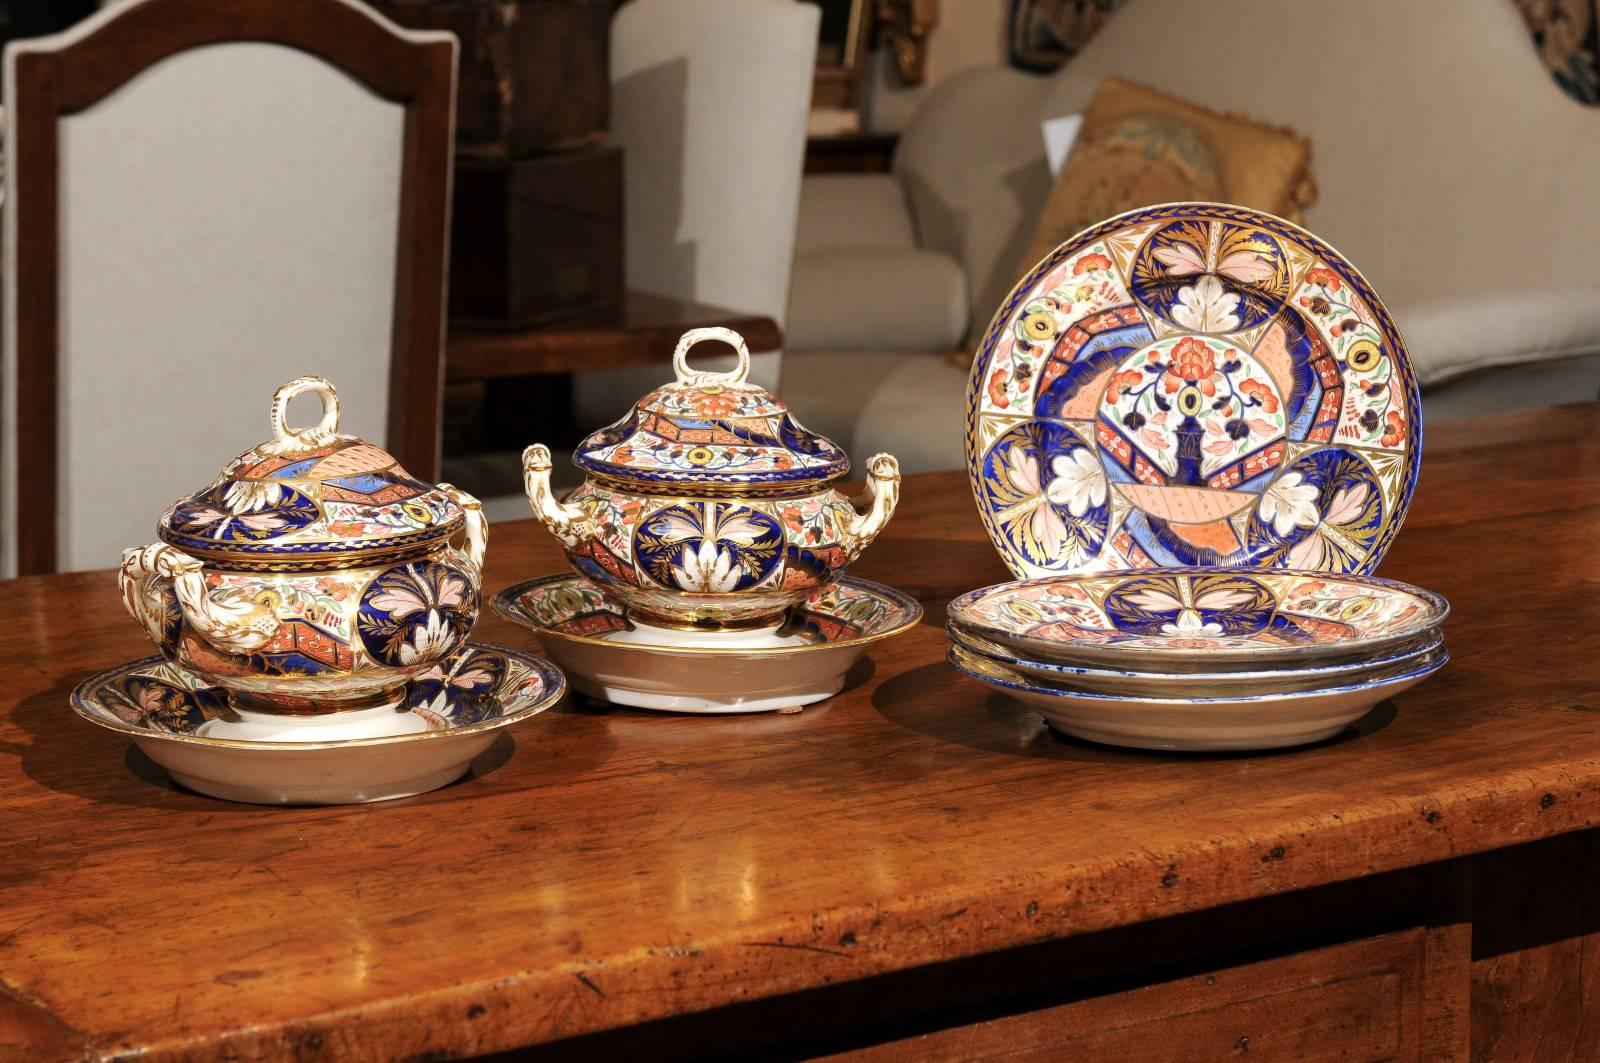 Pair of Derby sauce tureens with lid & underplate and 4 plates, England 19th Century. 10 piece set.